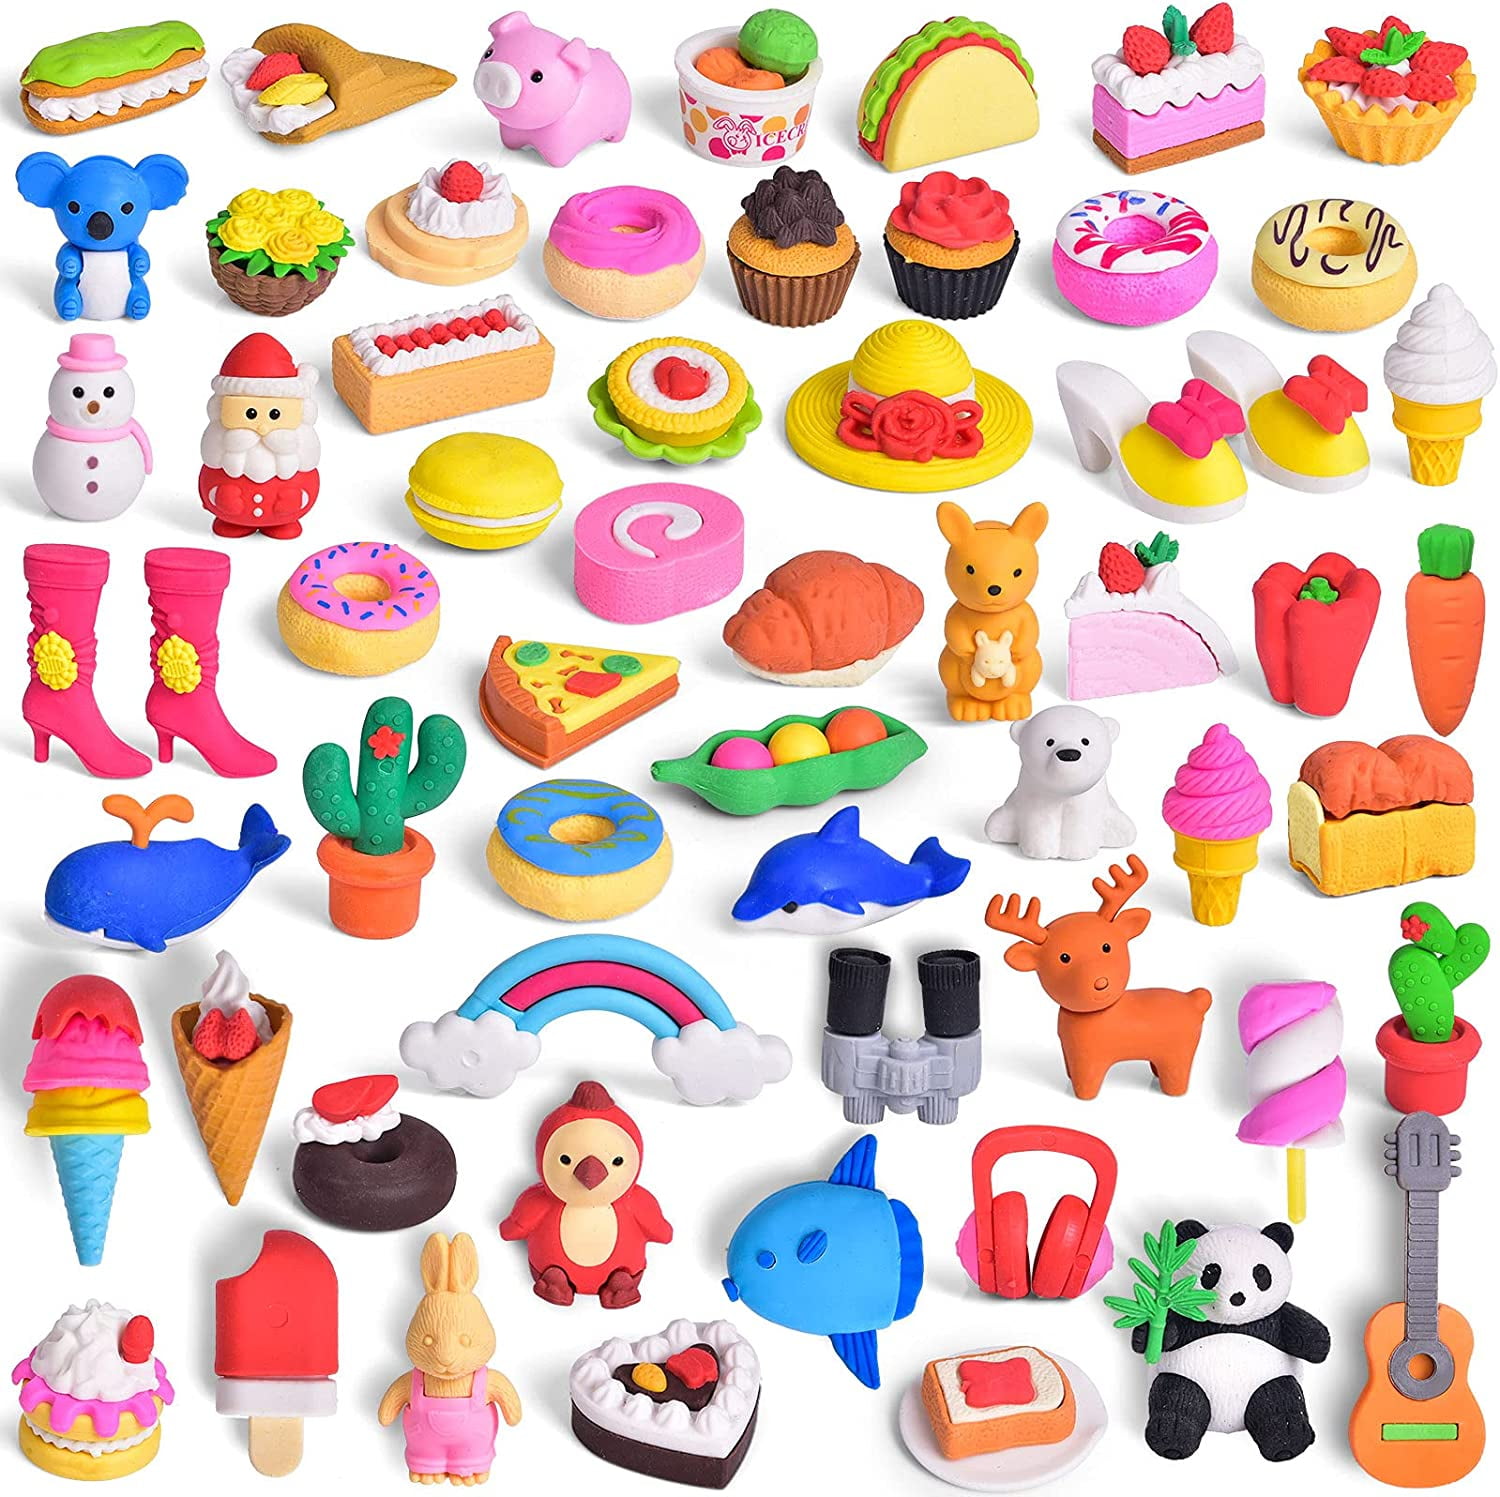 Creative Lollipop Eraser Rubber Pencil Candy Stationery Kid Student Gift Toy HOT 